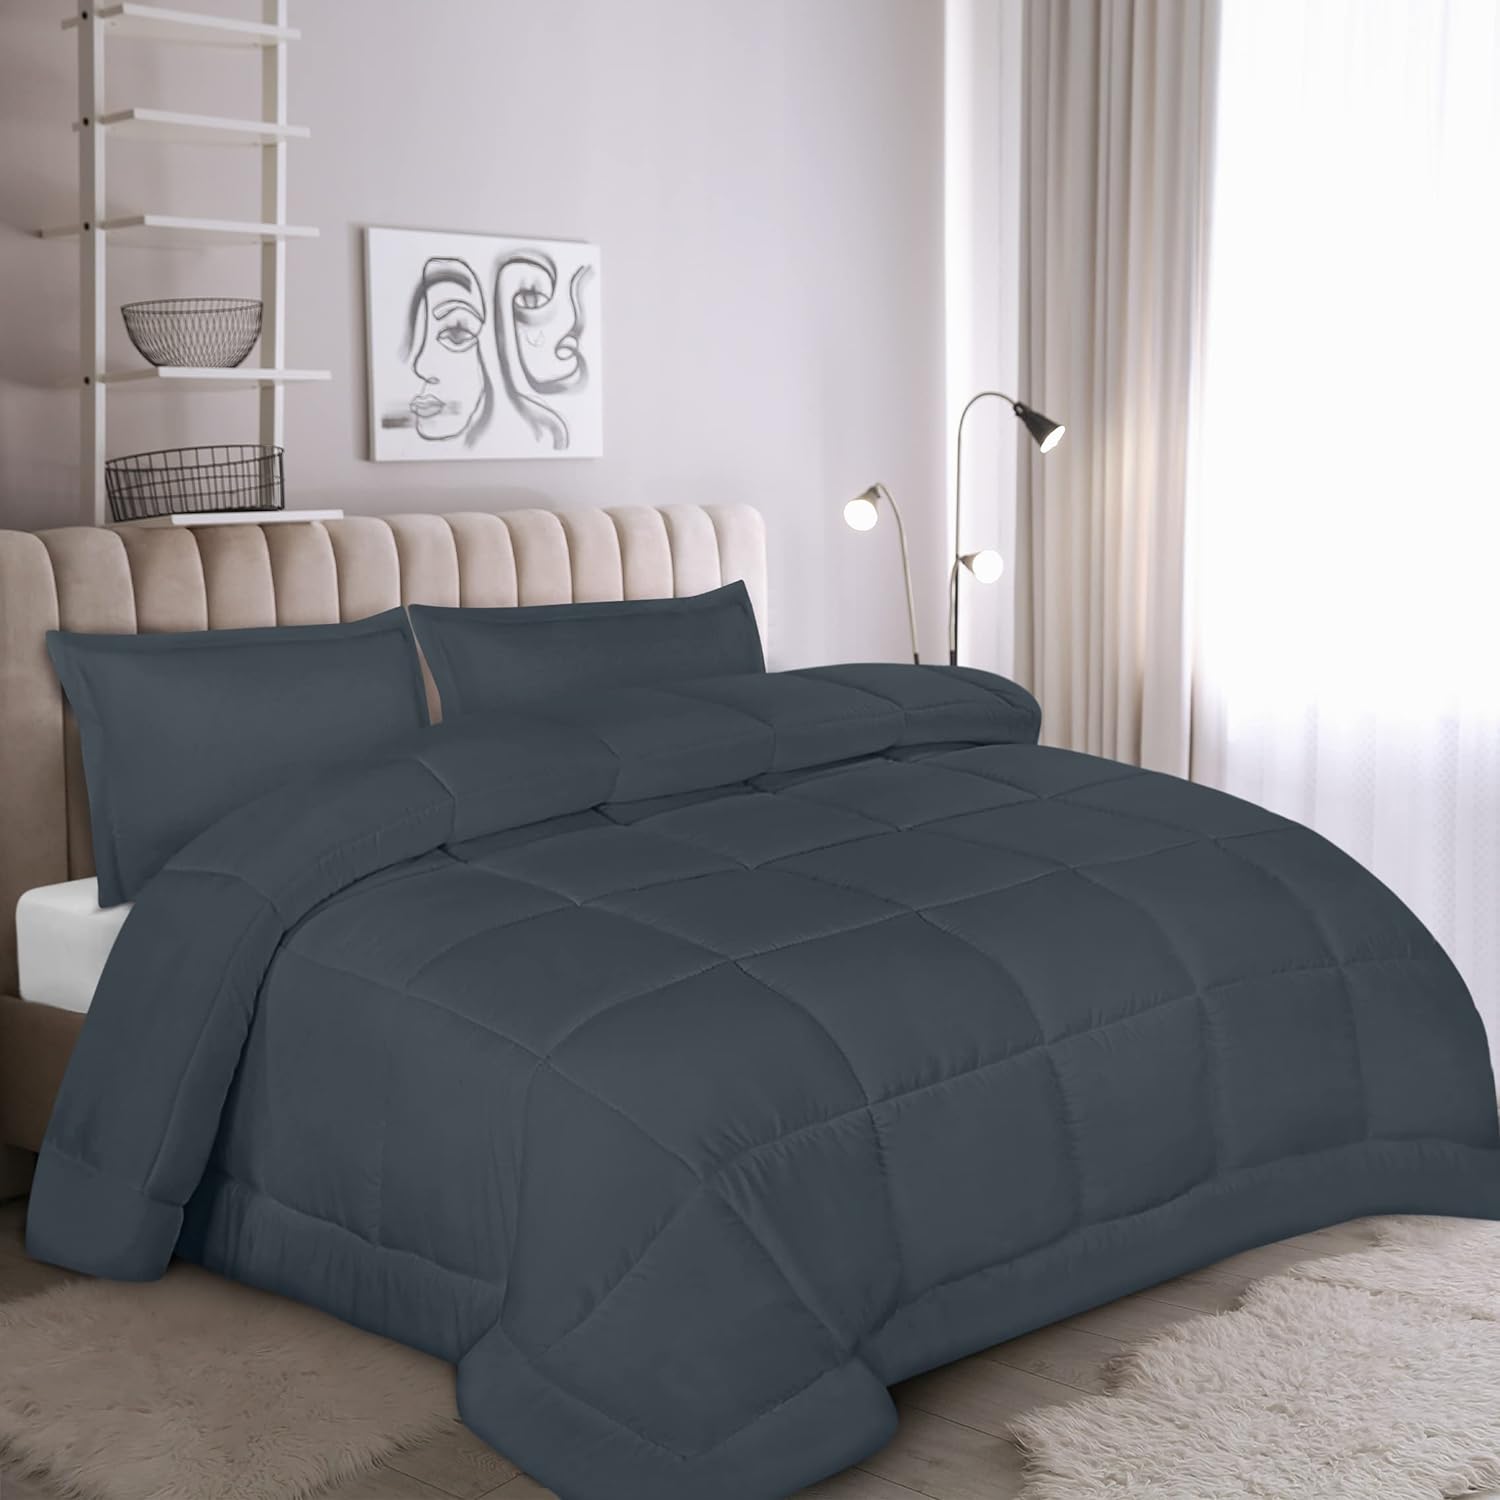 Utopia Bedding Ultra Plush Hypoallergenic, Siliconized fiberfill, Box  Stitched Alternative Comforter, Duvet Insert, Protects Against Dust Mites  and Allergens 